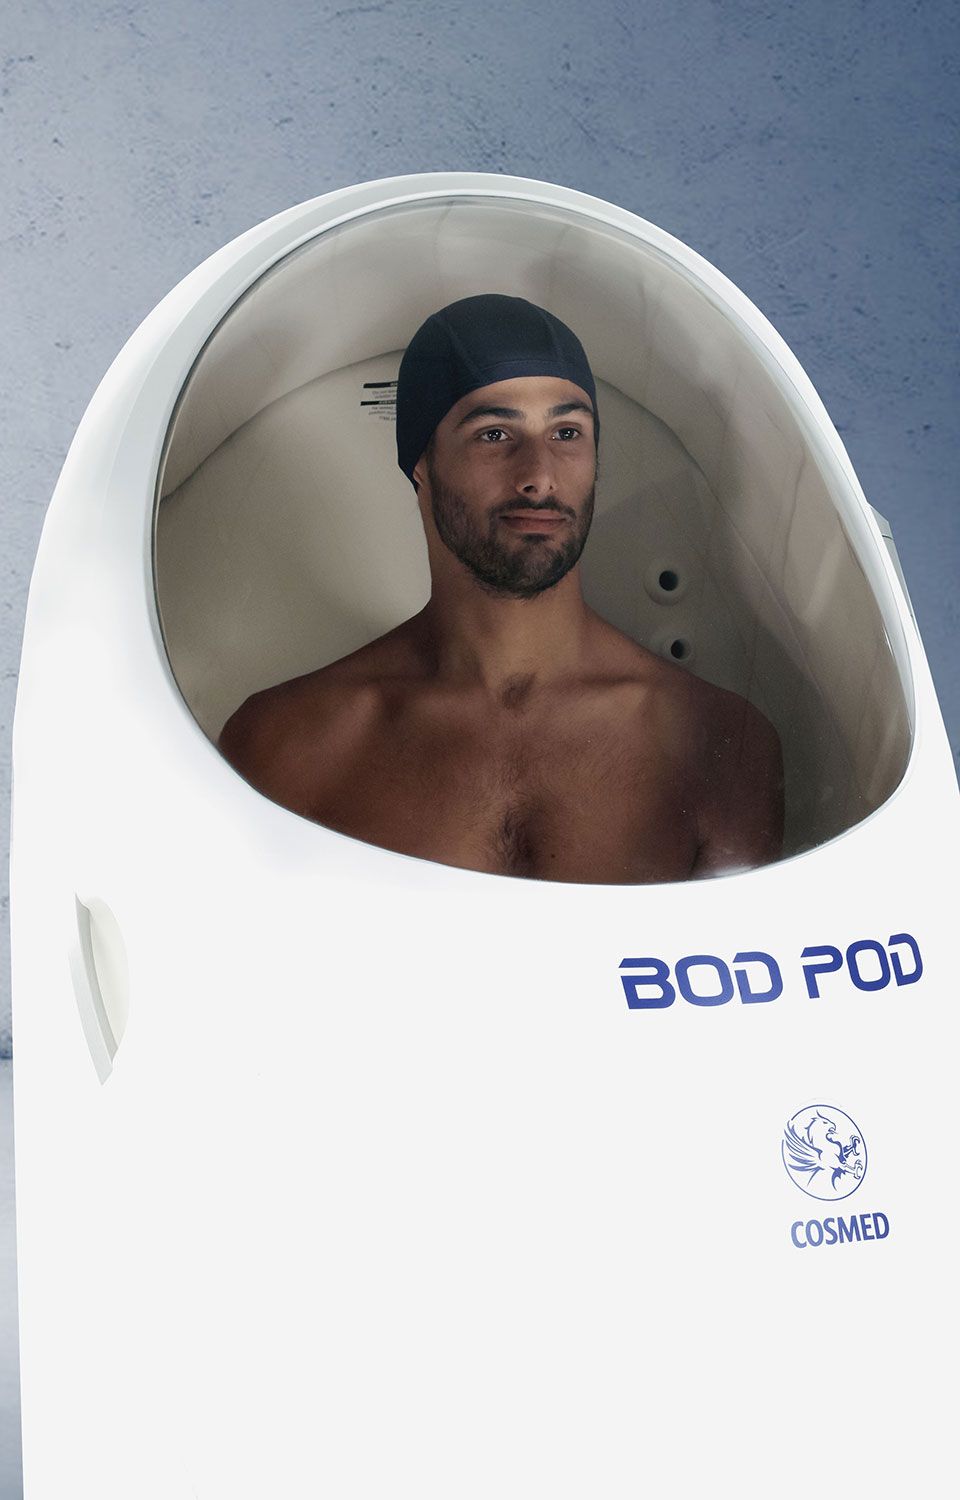 BOD POD GS-X - Man during Body Composition test